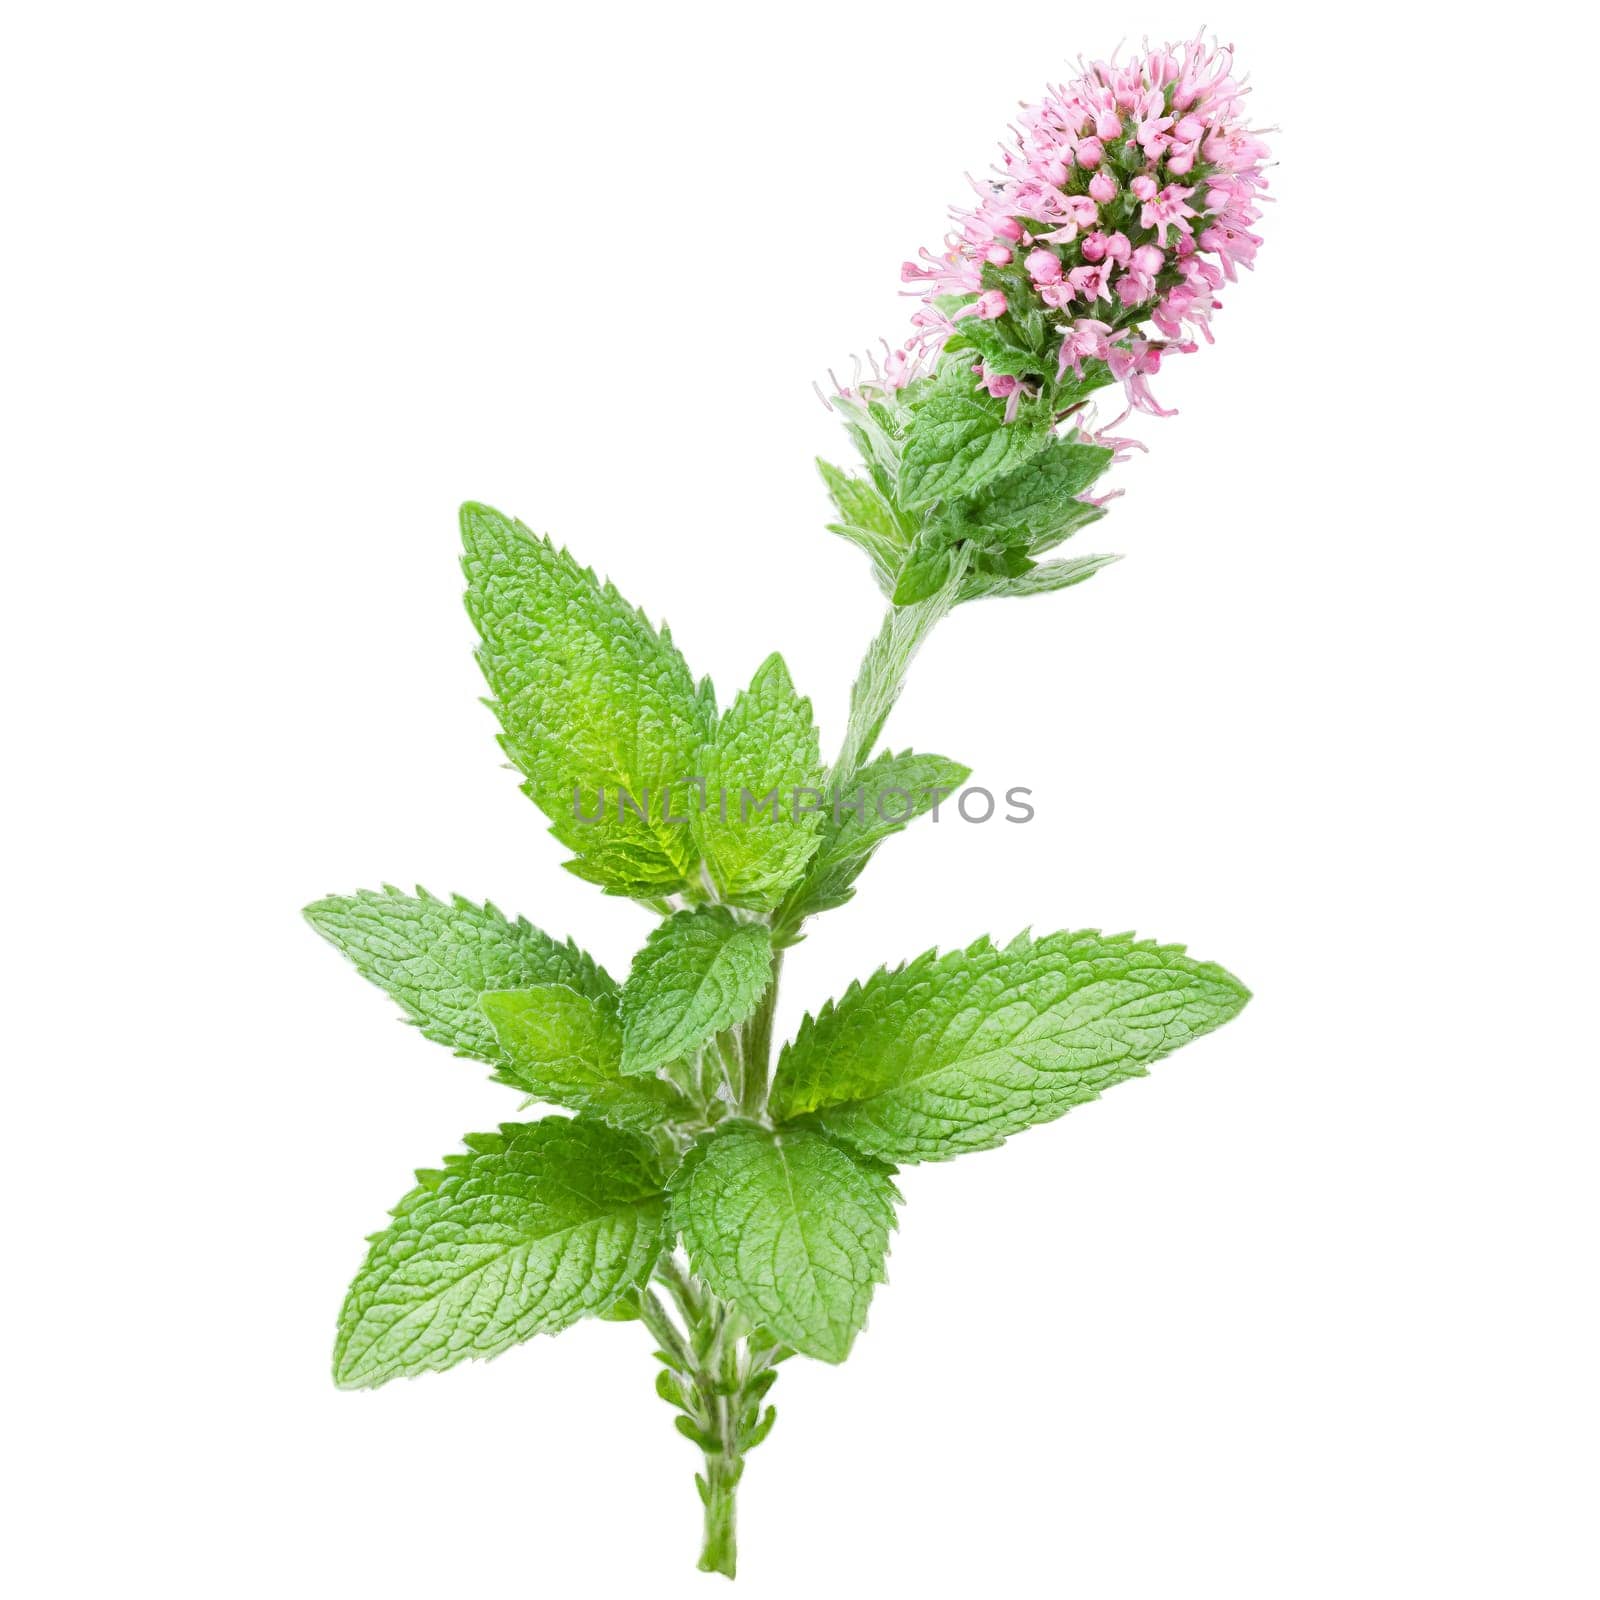 Spearmint Plant aromatic green leaves and spikes of small pink flowers Mentha spicata Final image by panophotograph